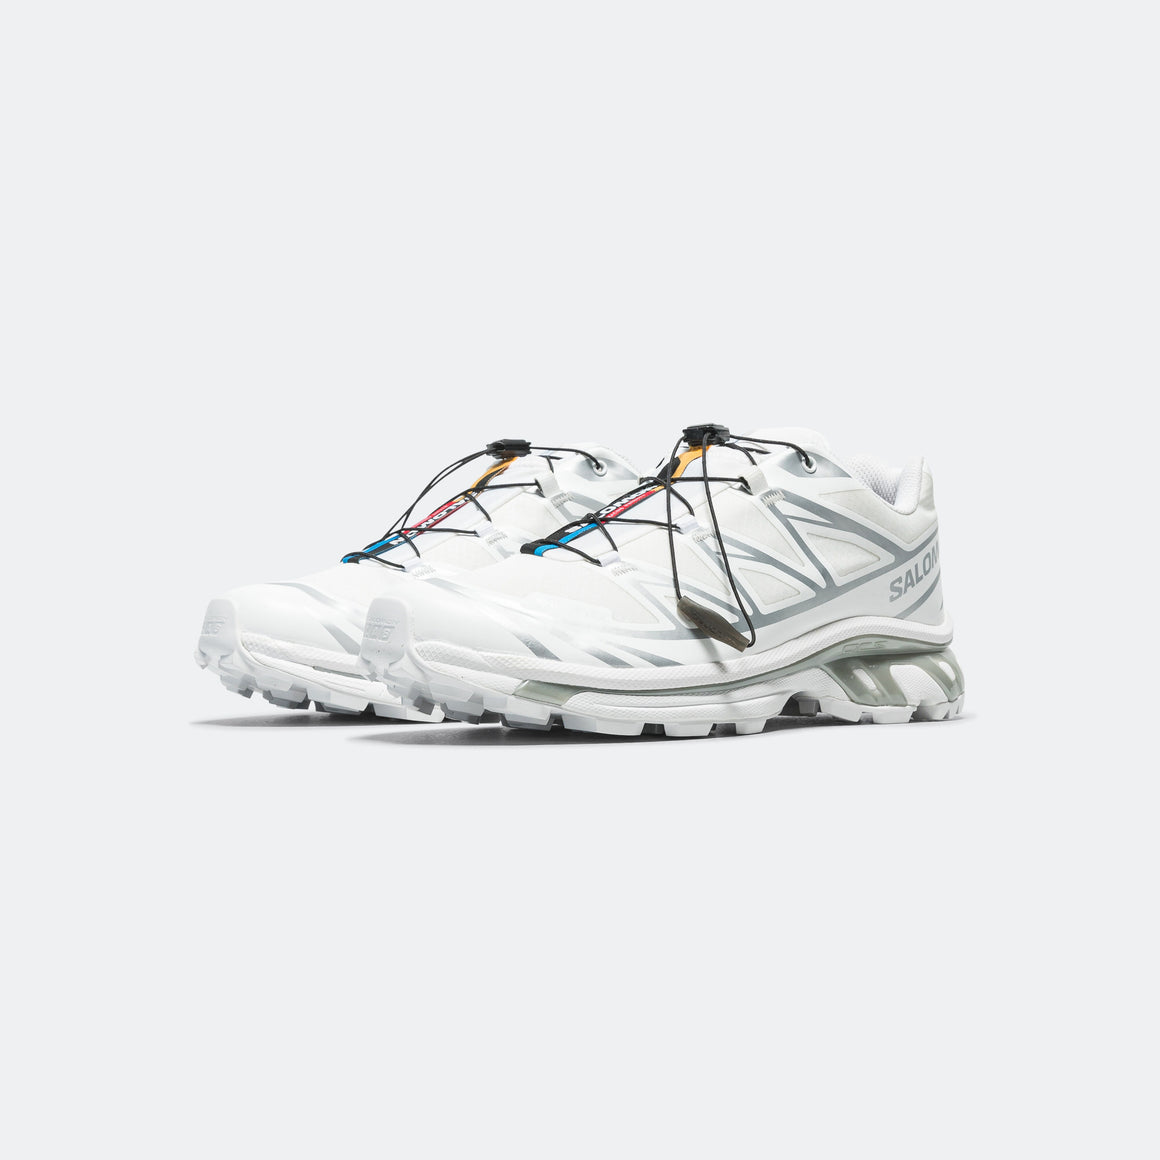 Salomon - XT-6 GORE-TEX® - White/Footwear Silver - UP THERE